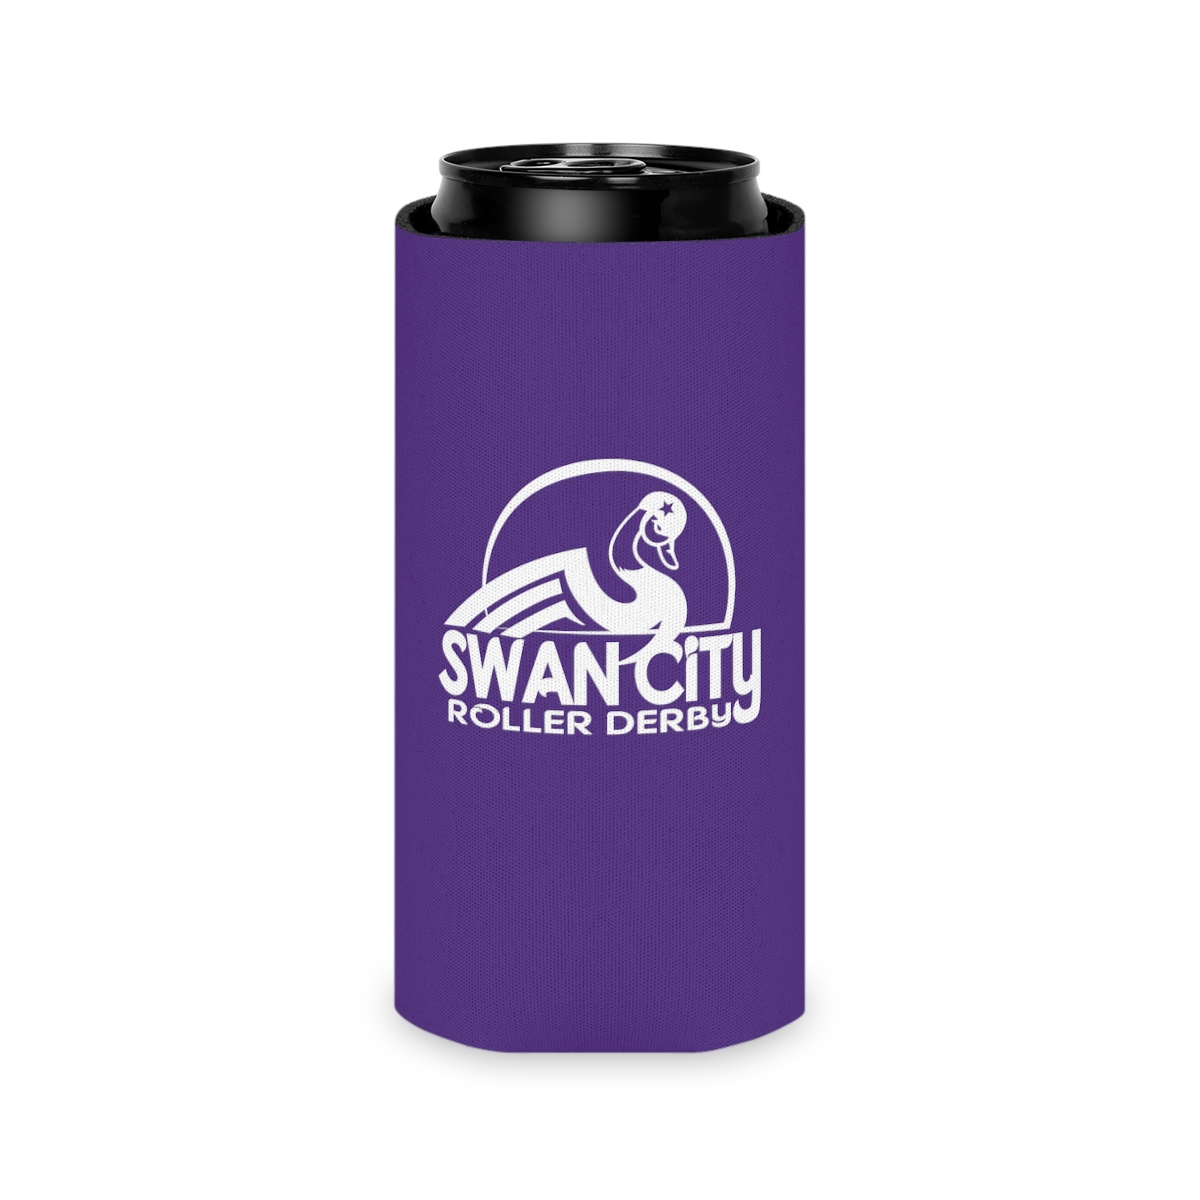 Swan City Roller Derby Coozie product main image